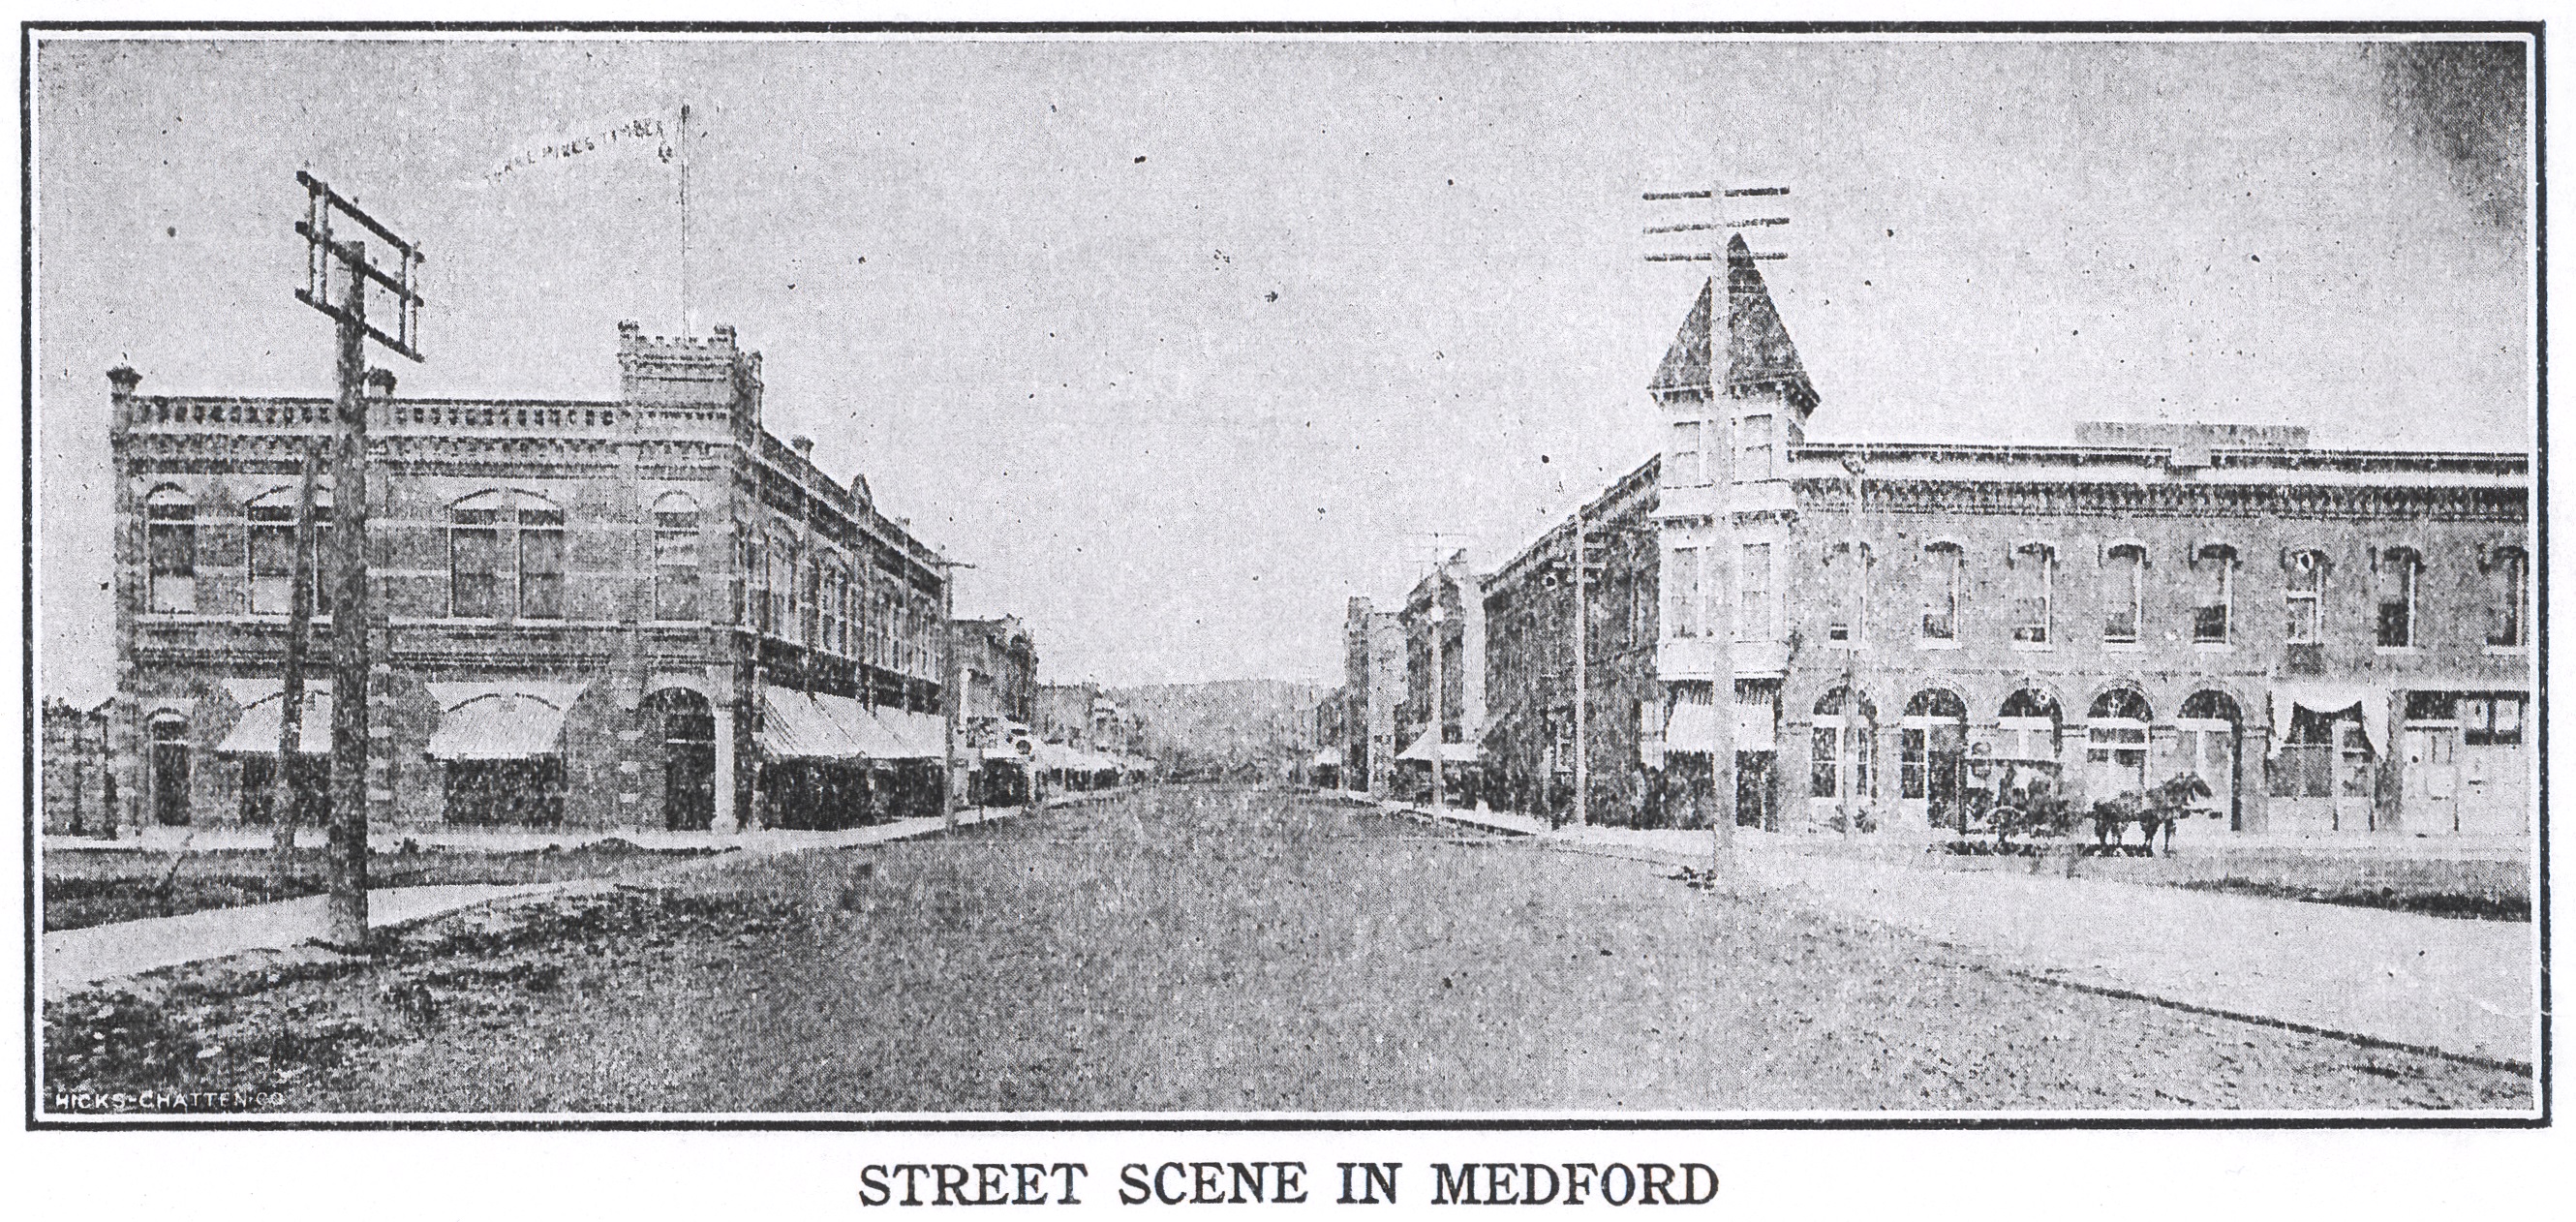 Looking east at Main and Front, 1904